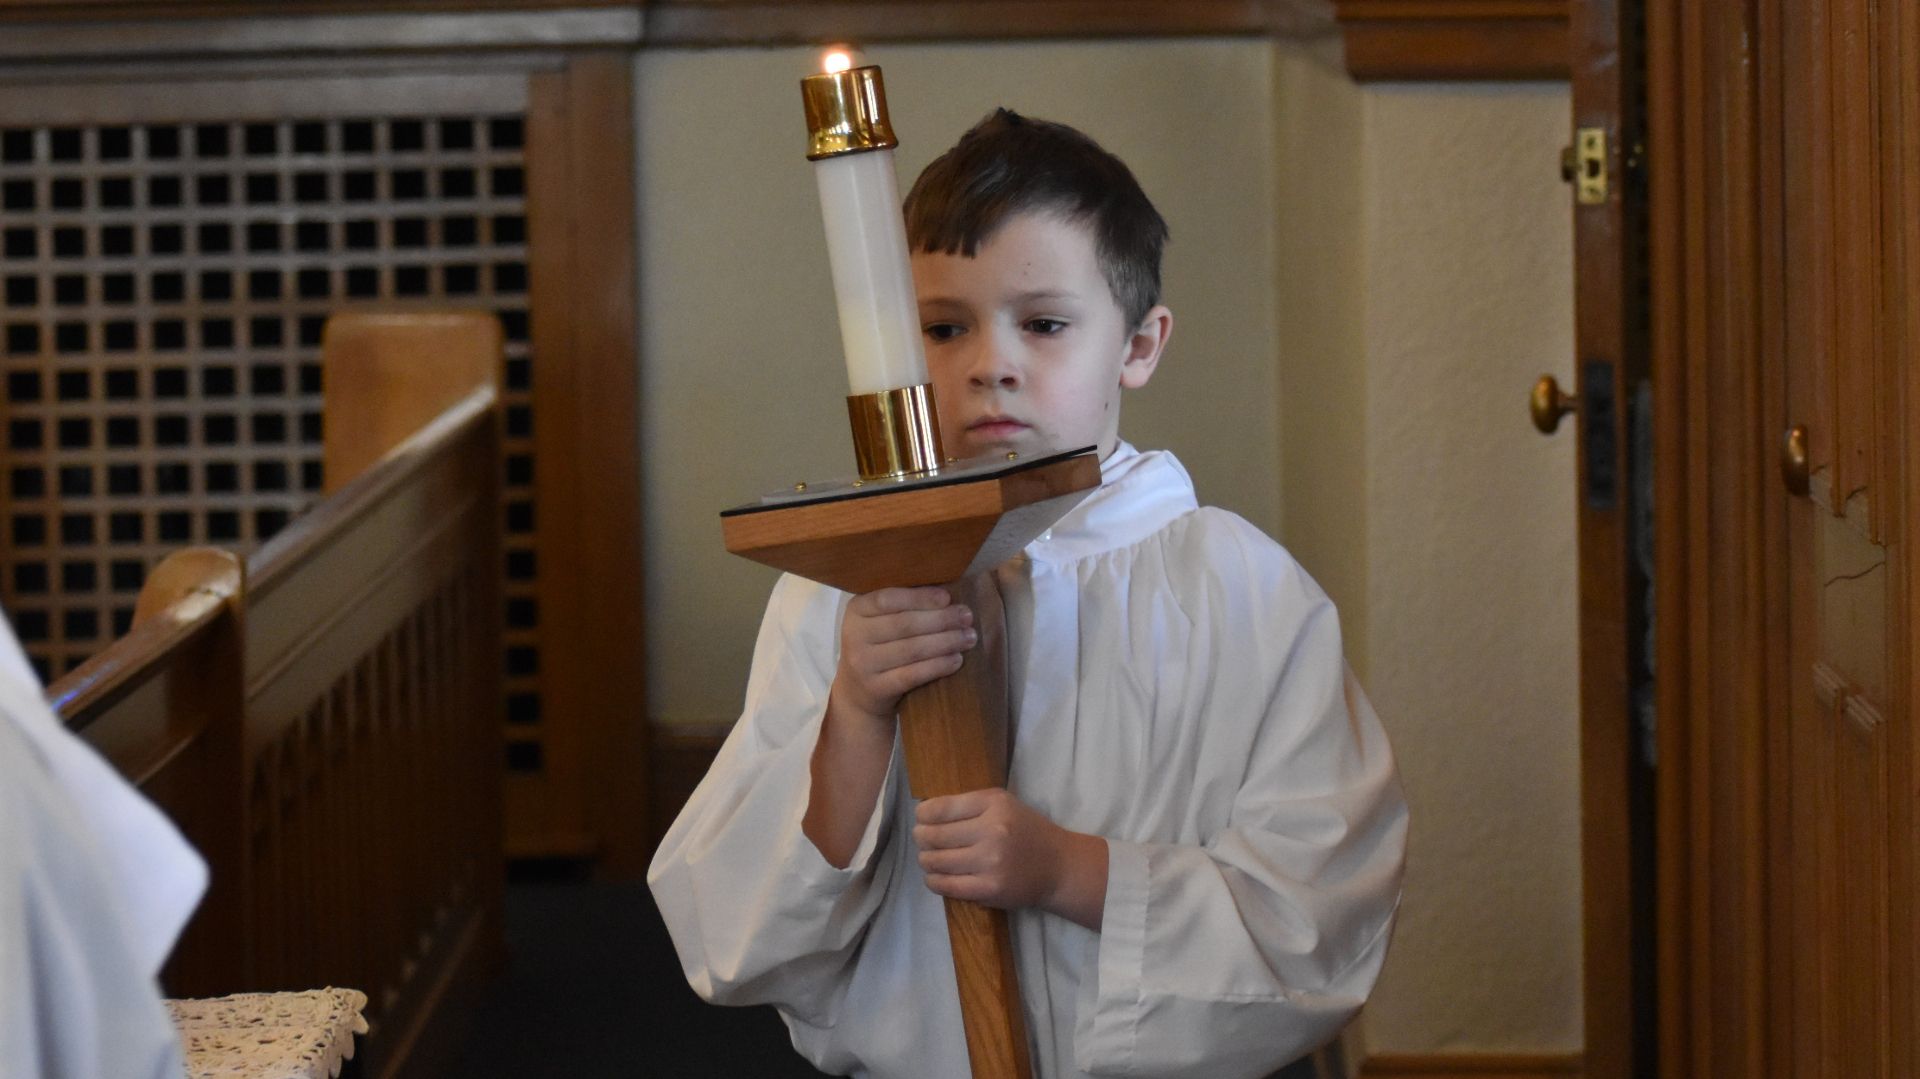 A young boy is holding a candle in a church